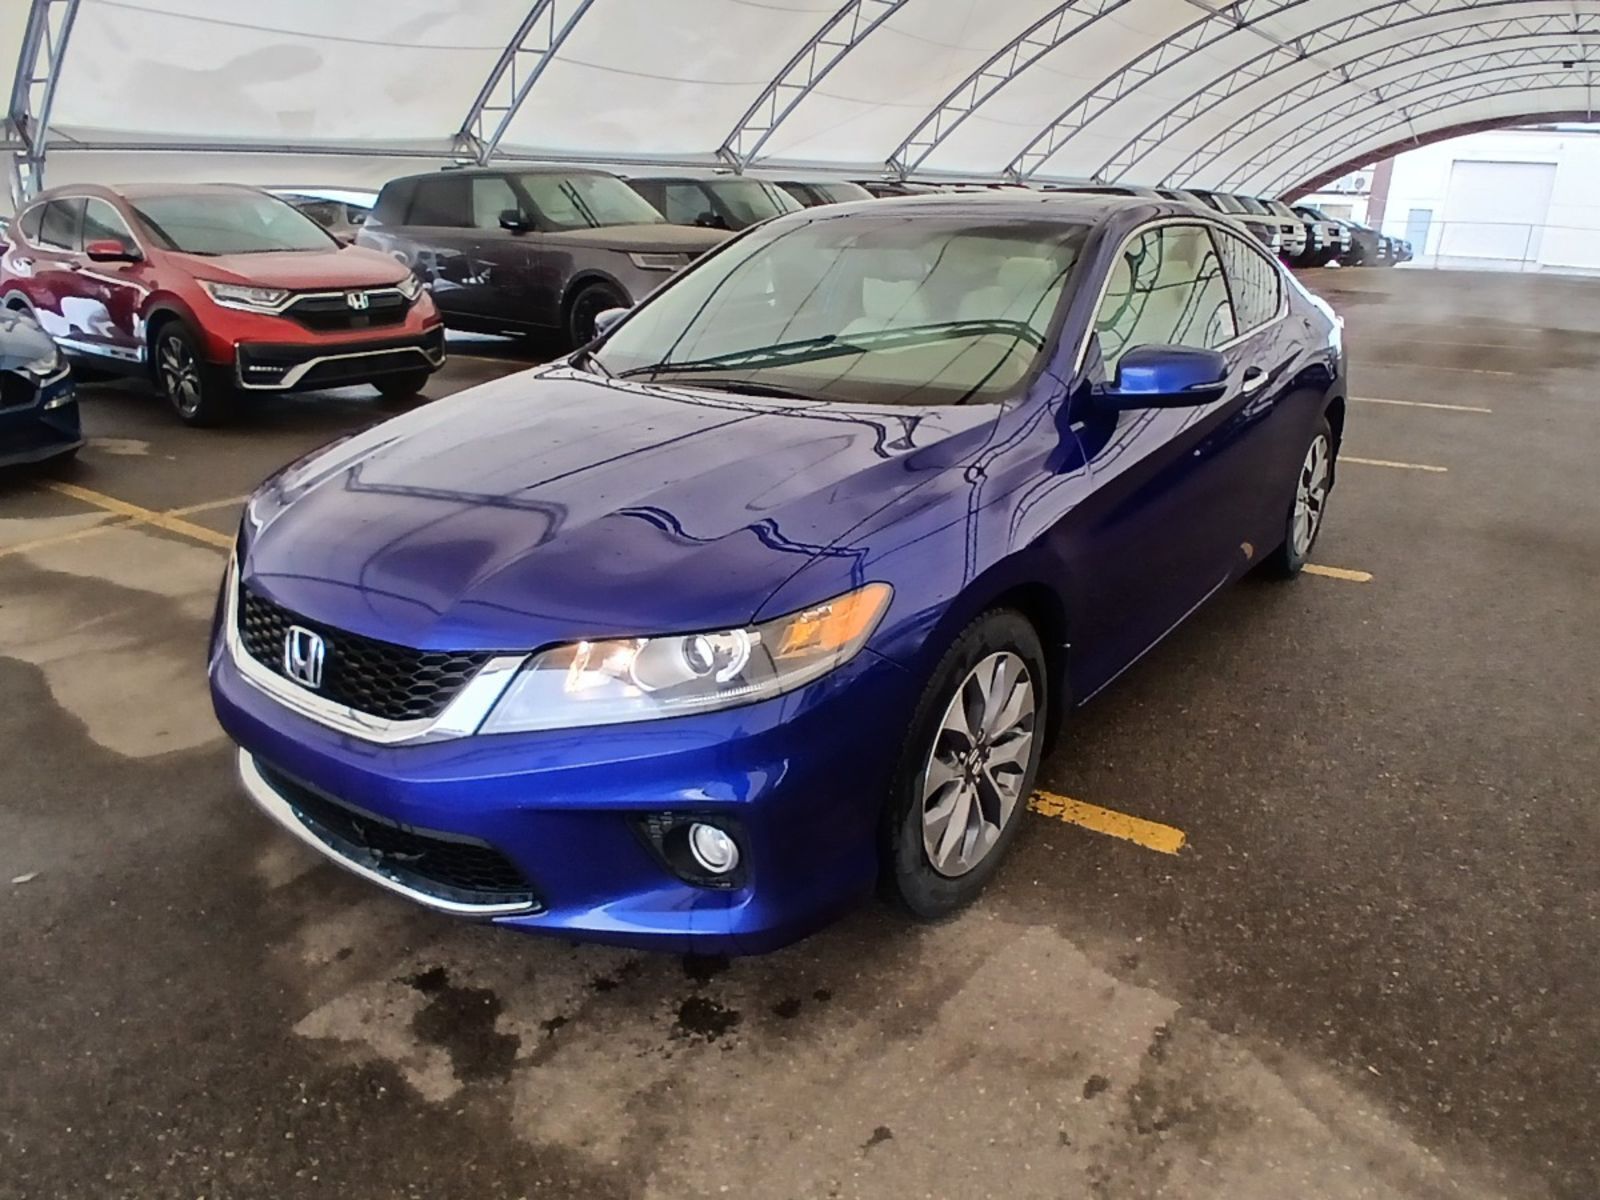 2015 Honda Accord Coupe EX-L - Leather | Sunroof | Driver's Seat Memory